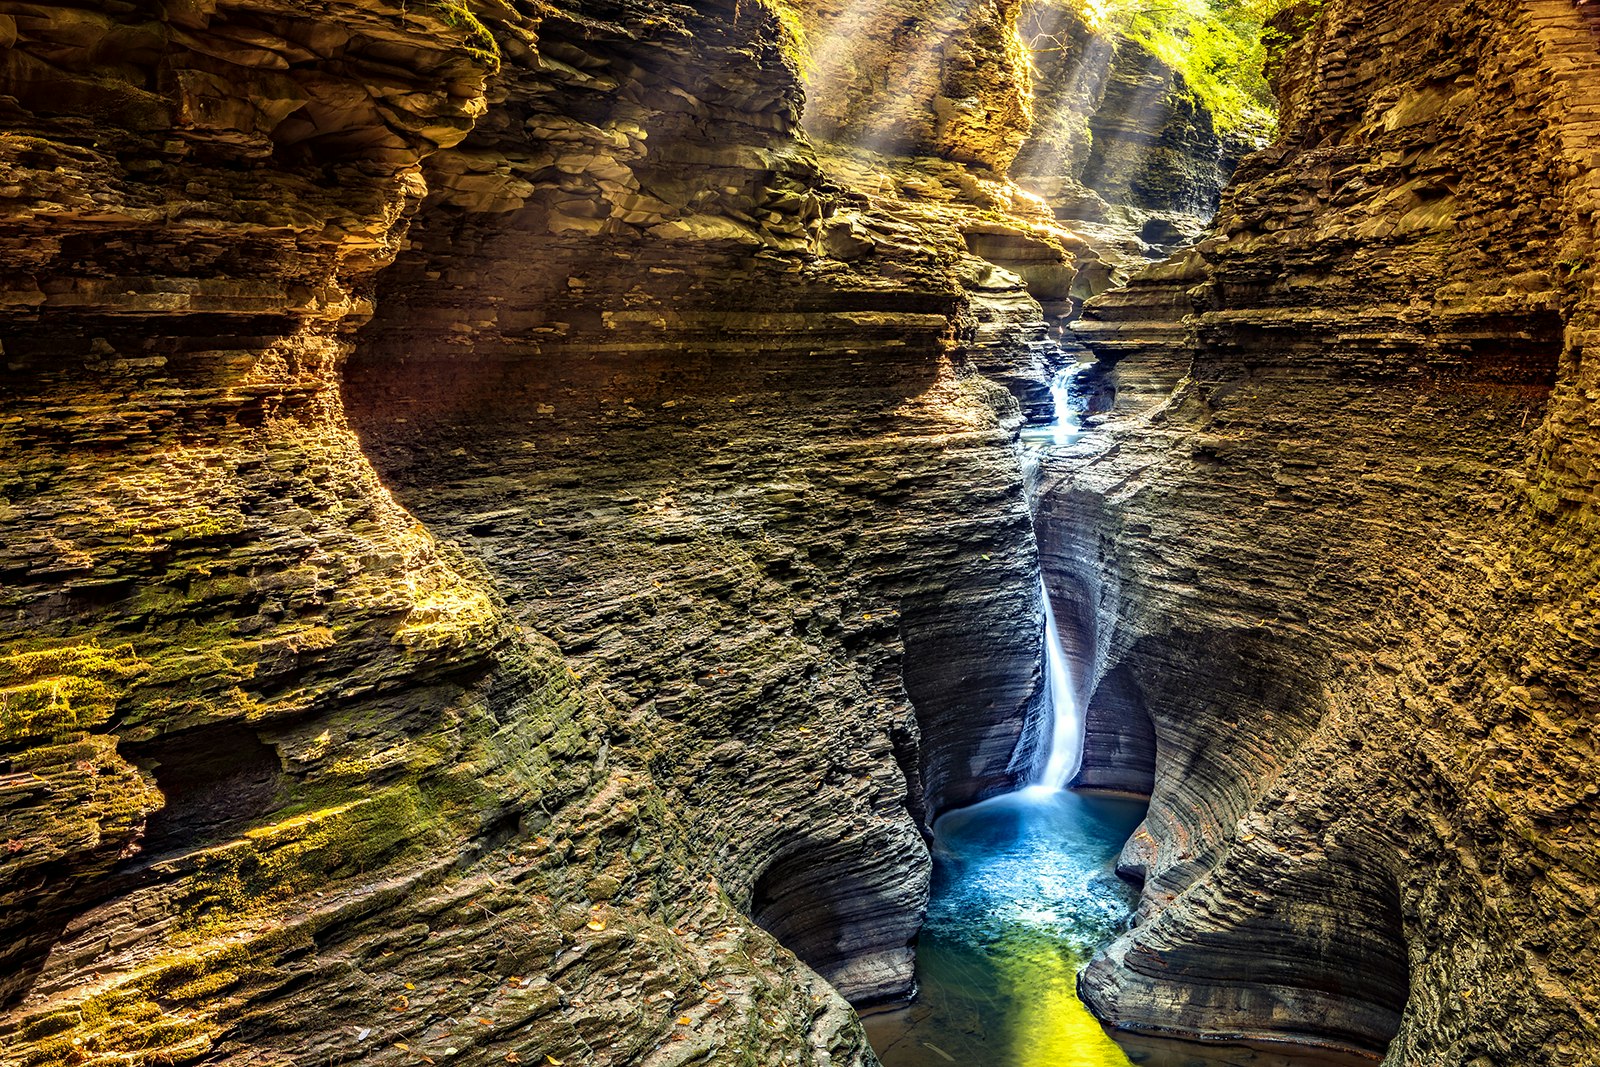 A waterfall in a canyon in Watkins Glen is illuminated by light from above © Ultima_Gaina / Getty Images